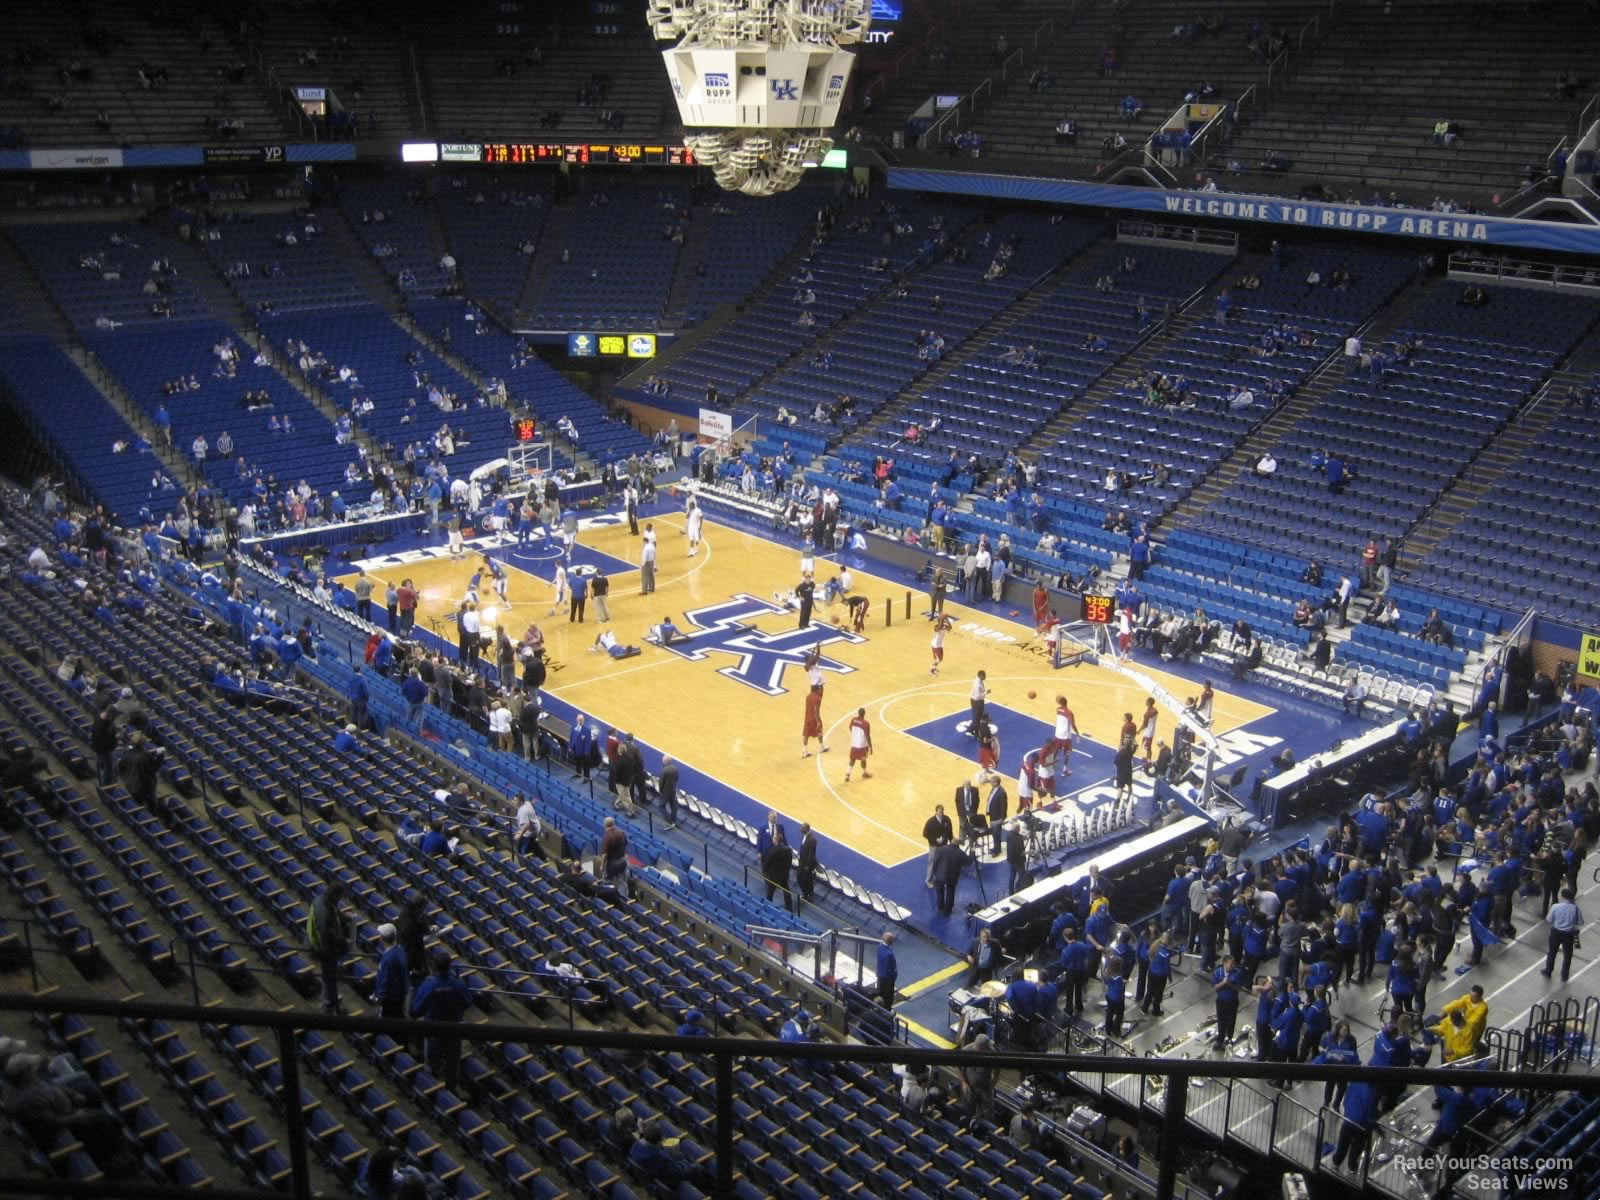 Rupp Arena Seating Chart With Rows And Seat Numbers